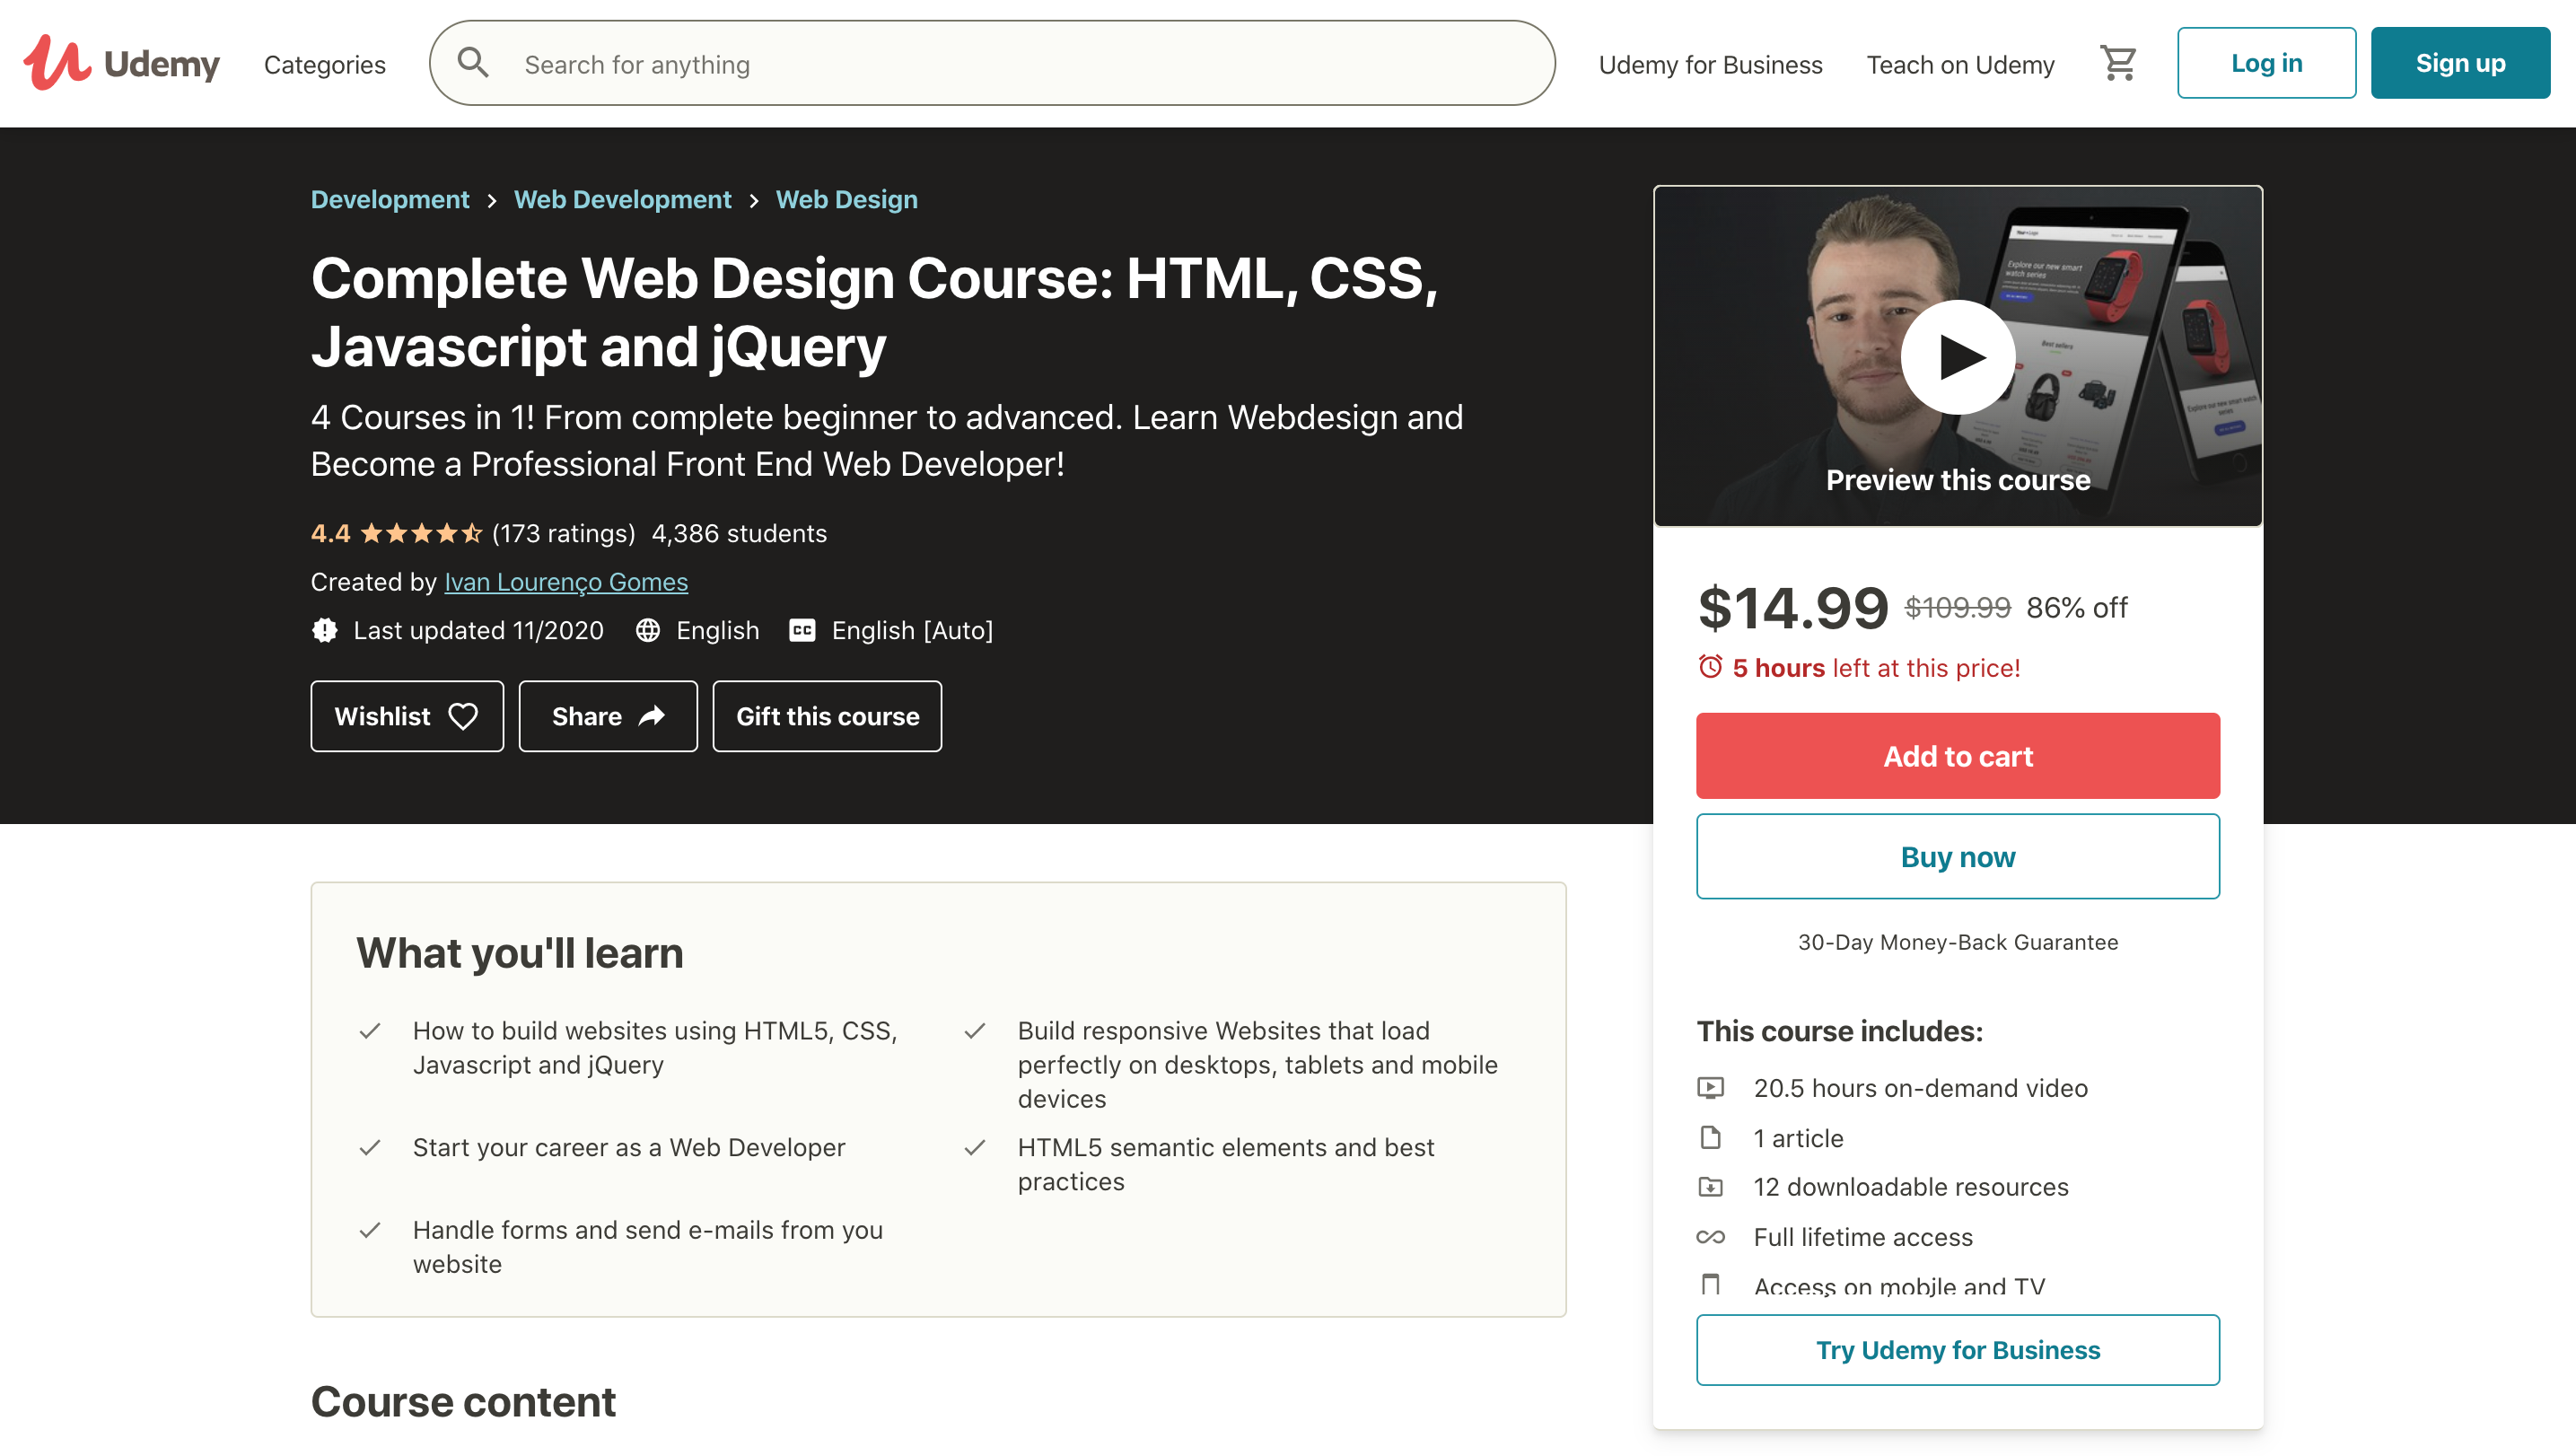 Complete-Web-Design-Course-HTML-CSS-Javascript-and-jQuery-Udemy